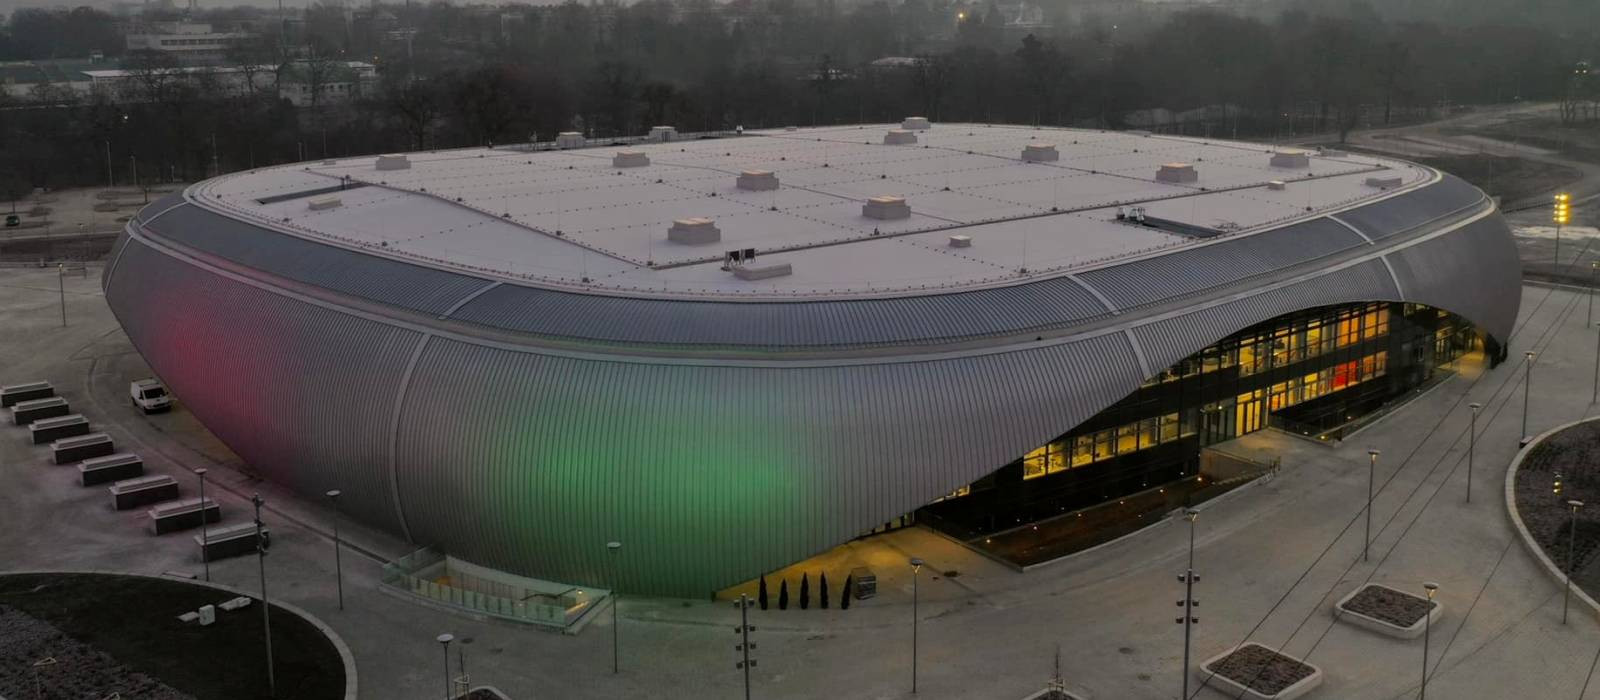 One of the largest handball halls in Hungary was handed over.